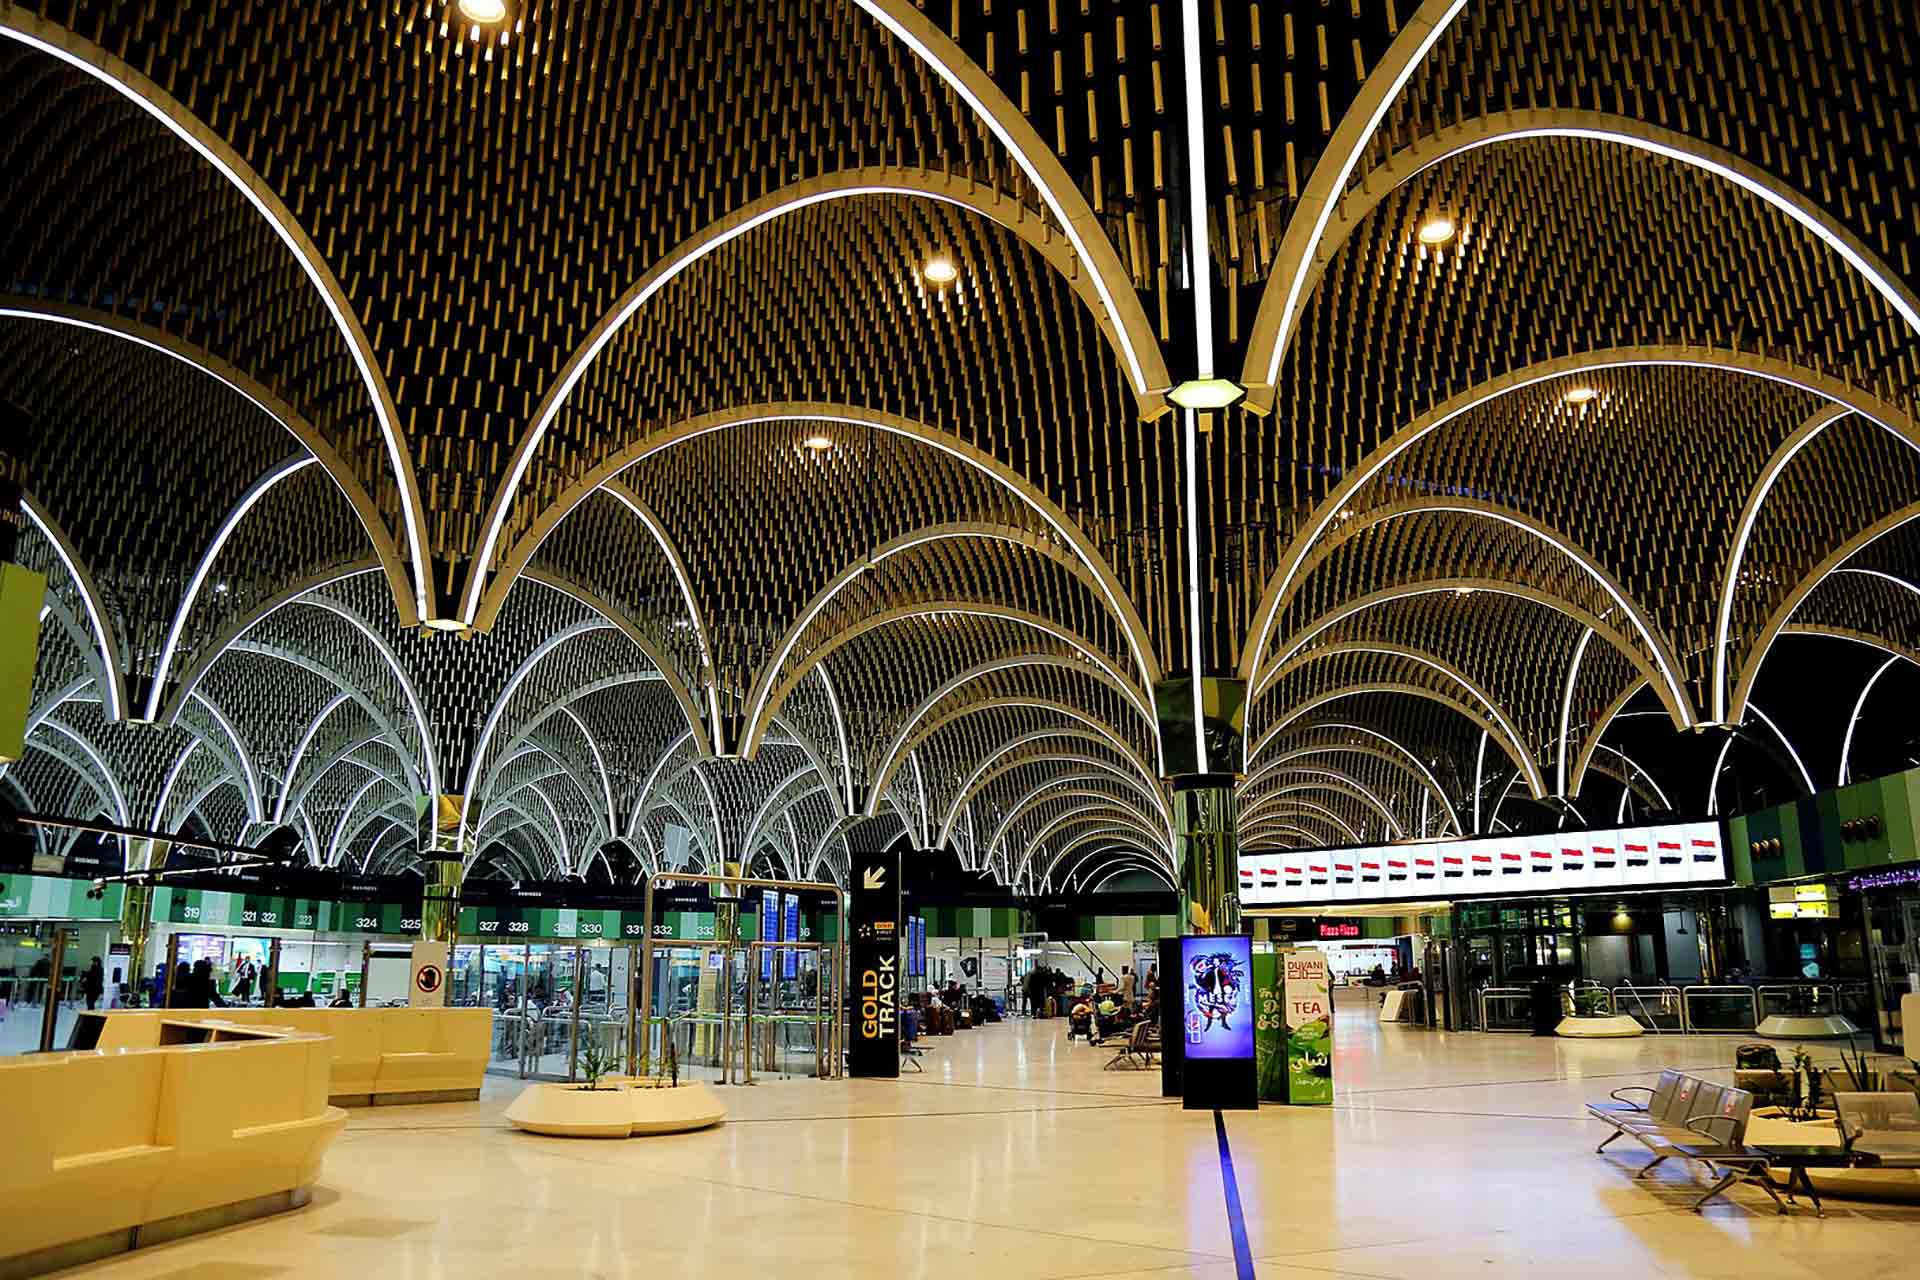 Baghdad Airport’s Employees Flag Concerns Over Security Company